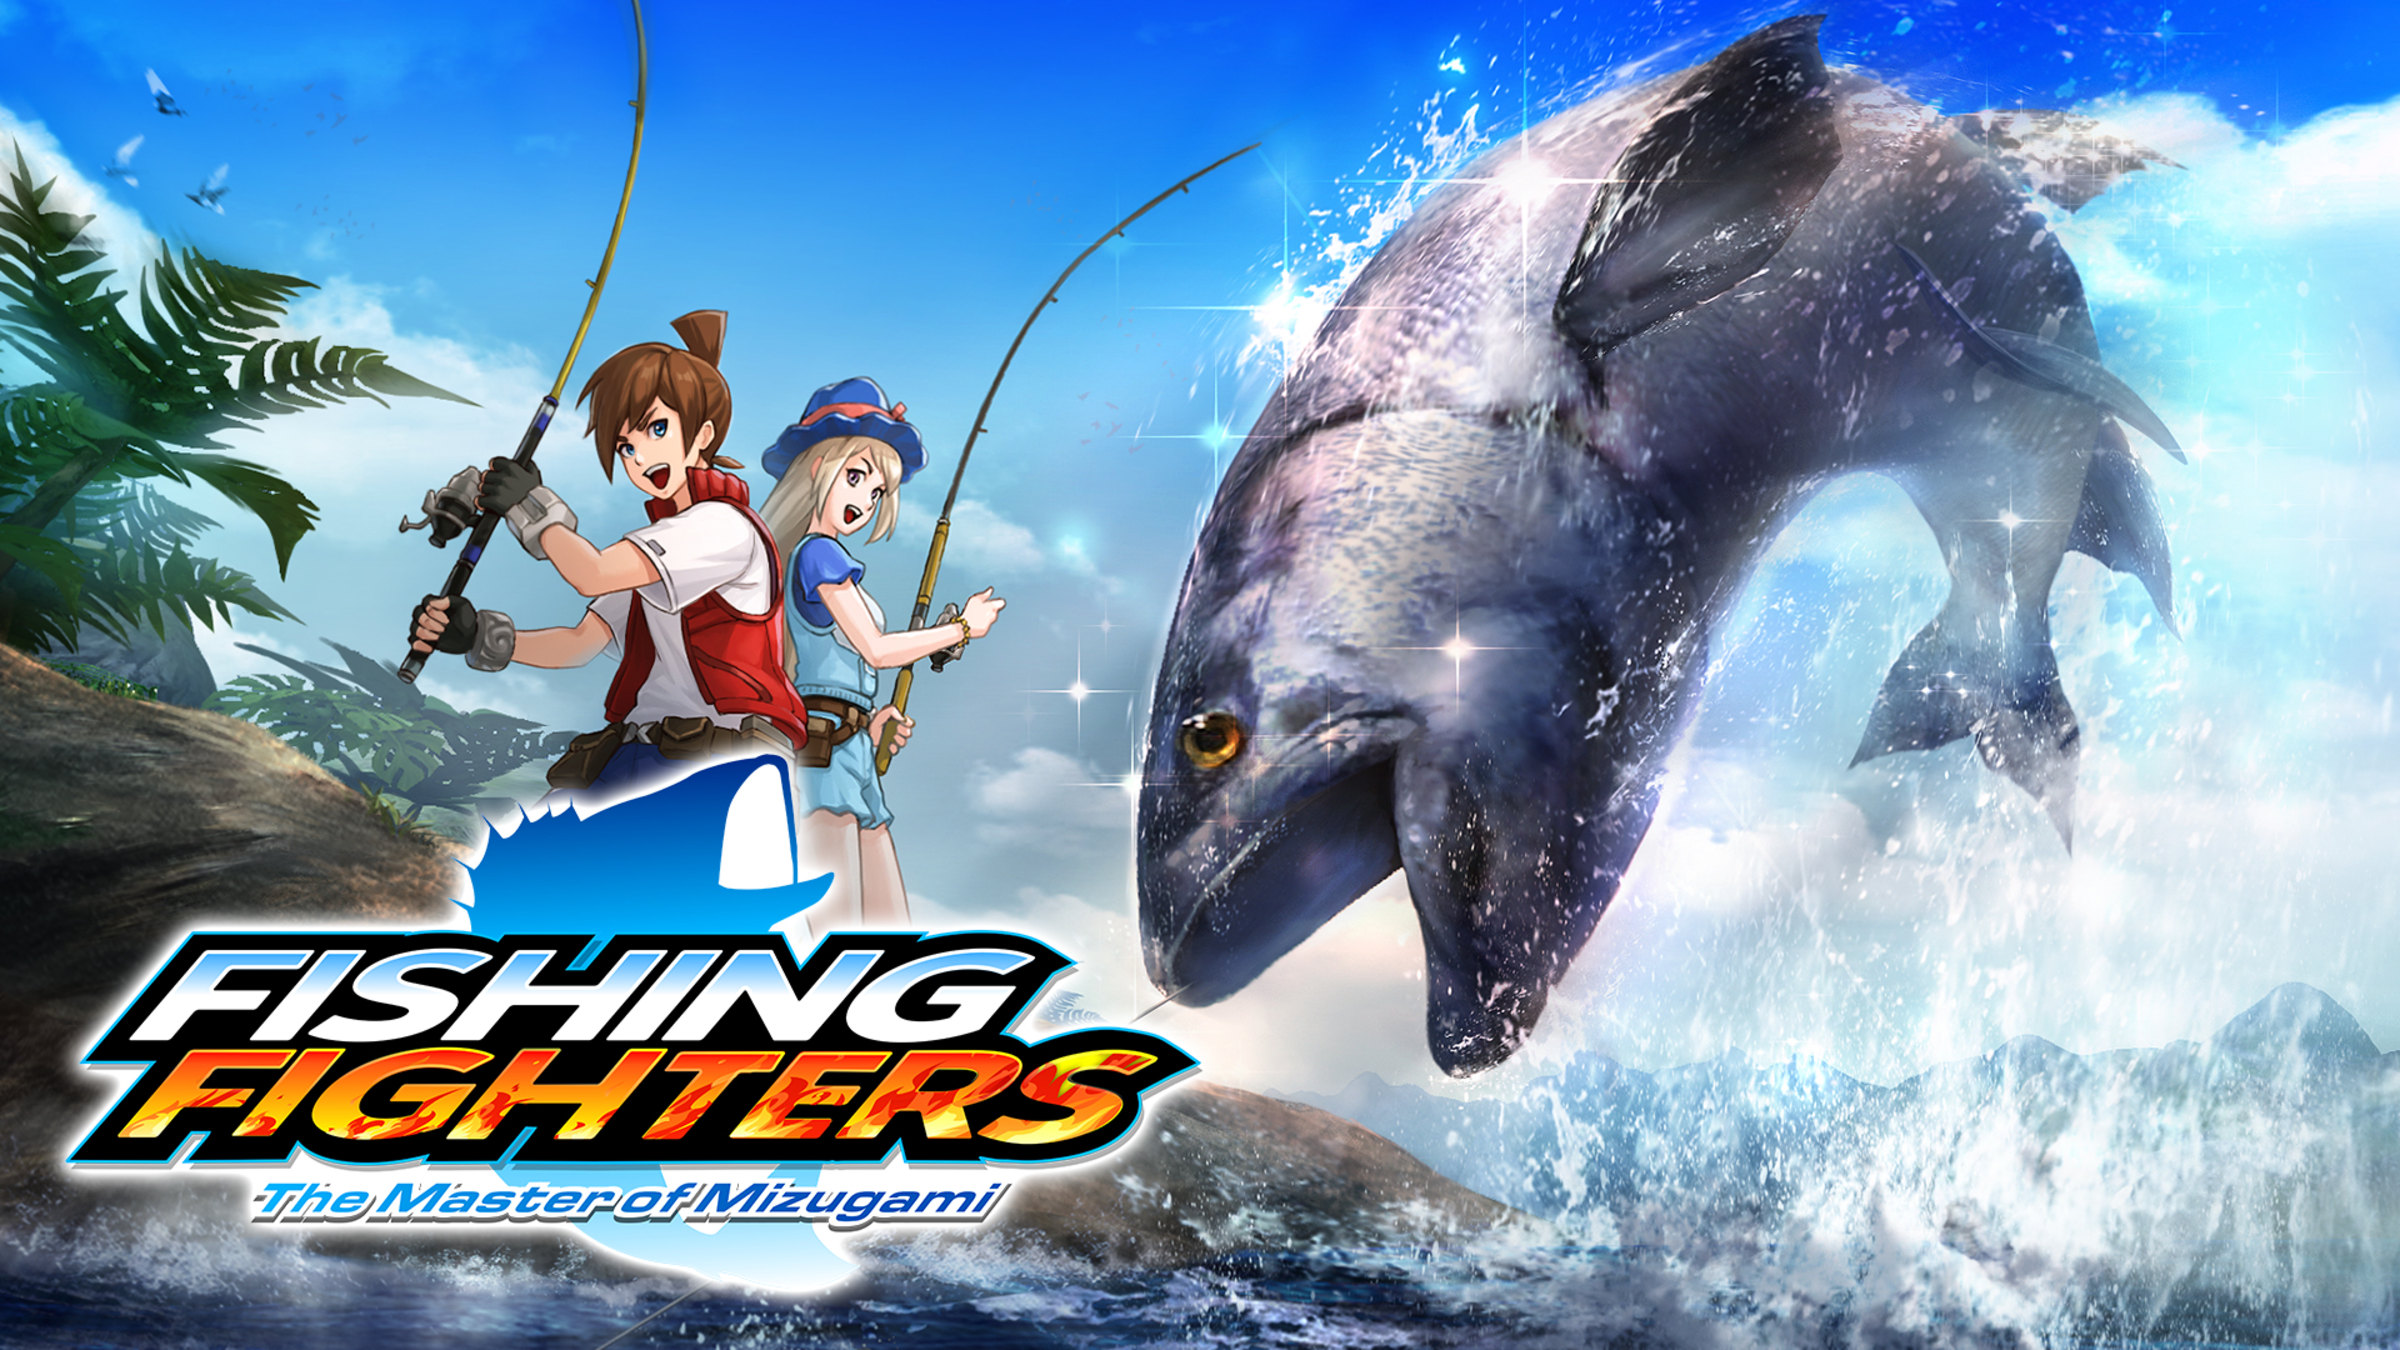 Fishing Fighters for Nintendo Switch - Nintendo Official Site